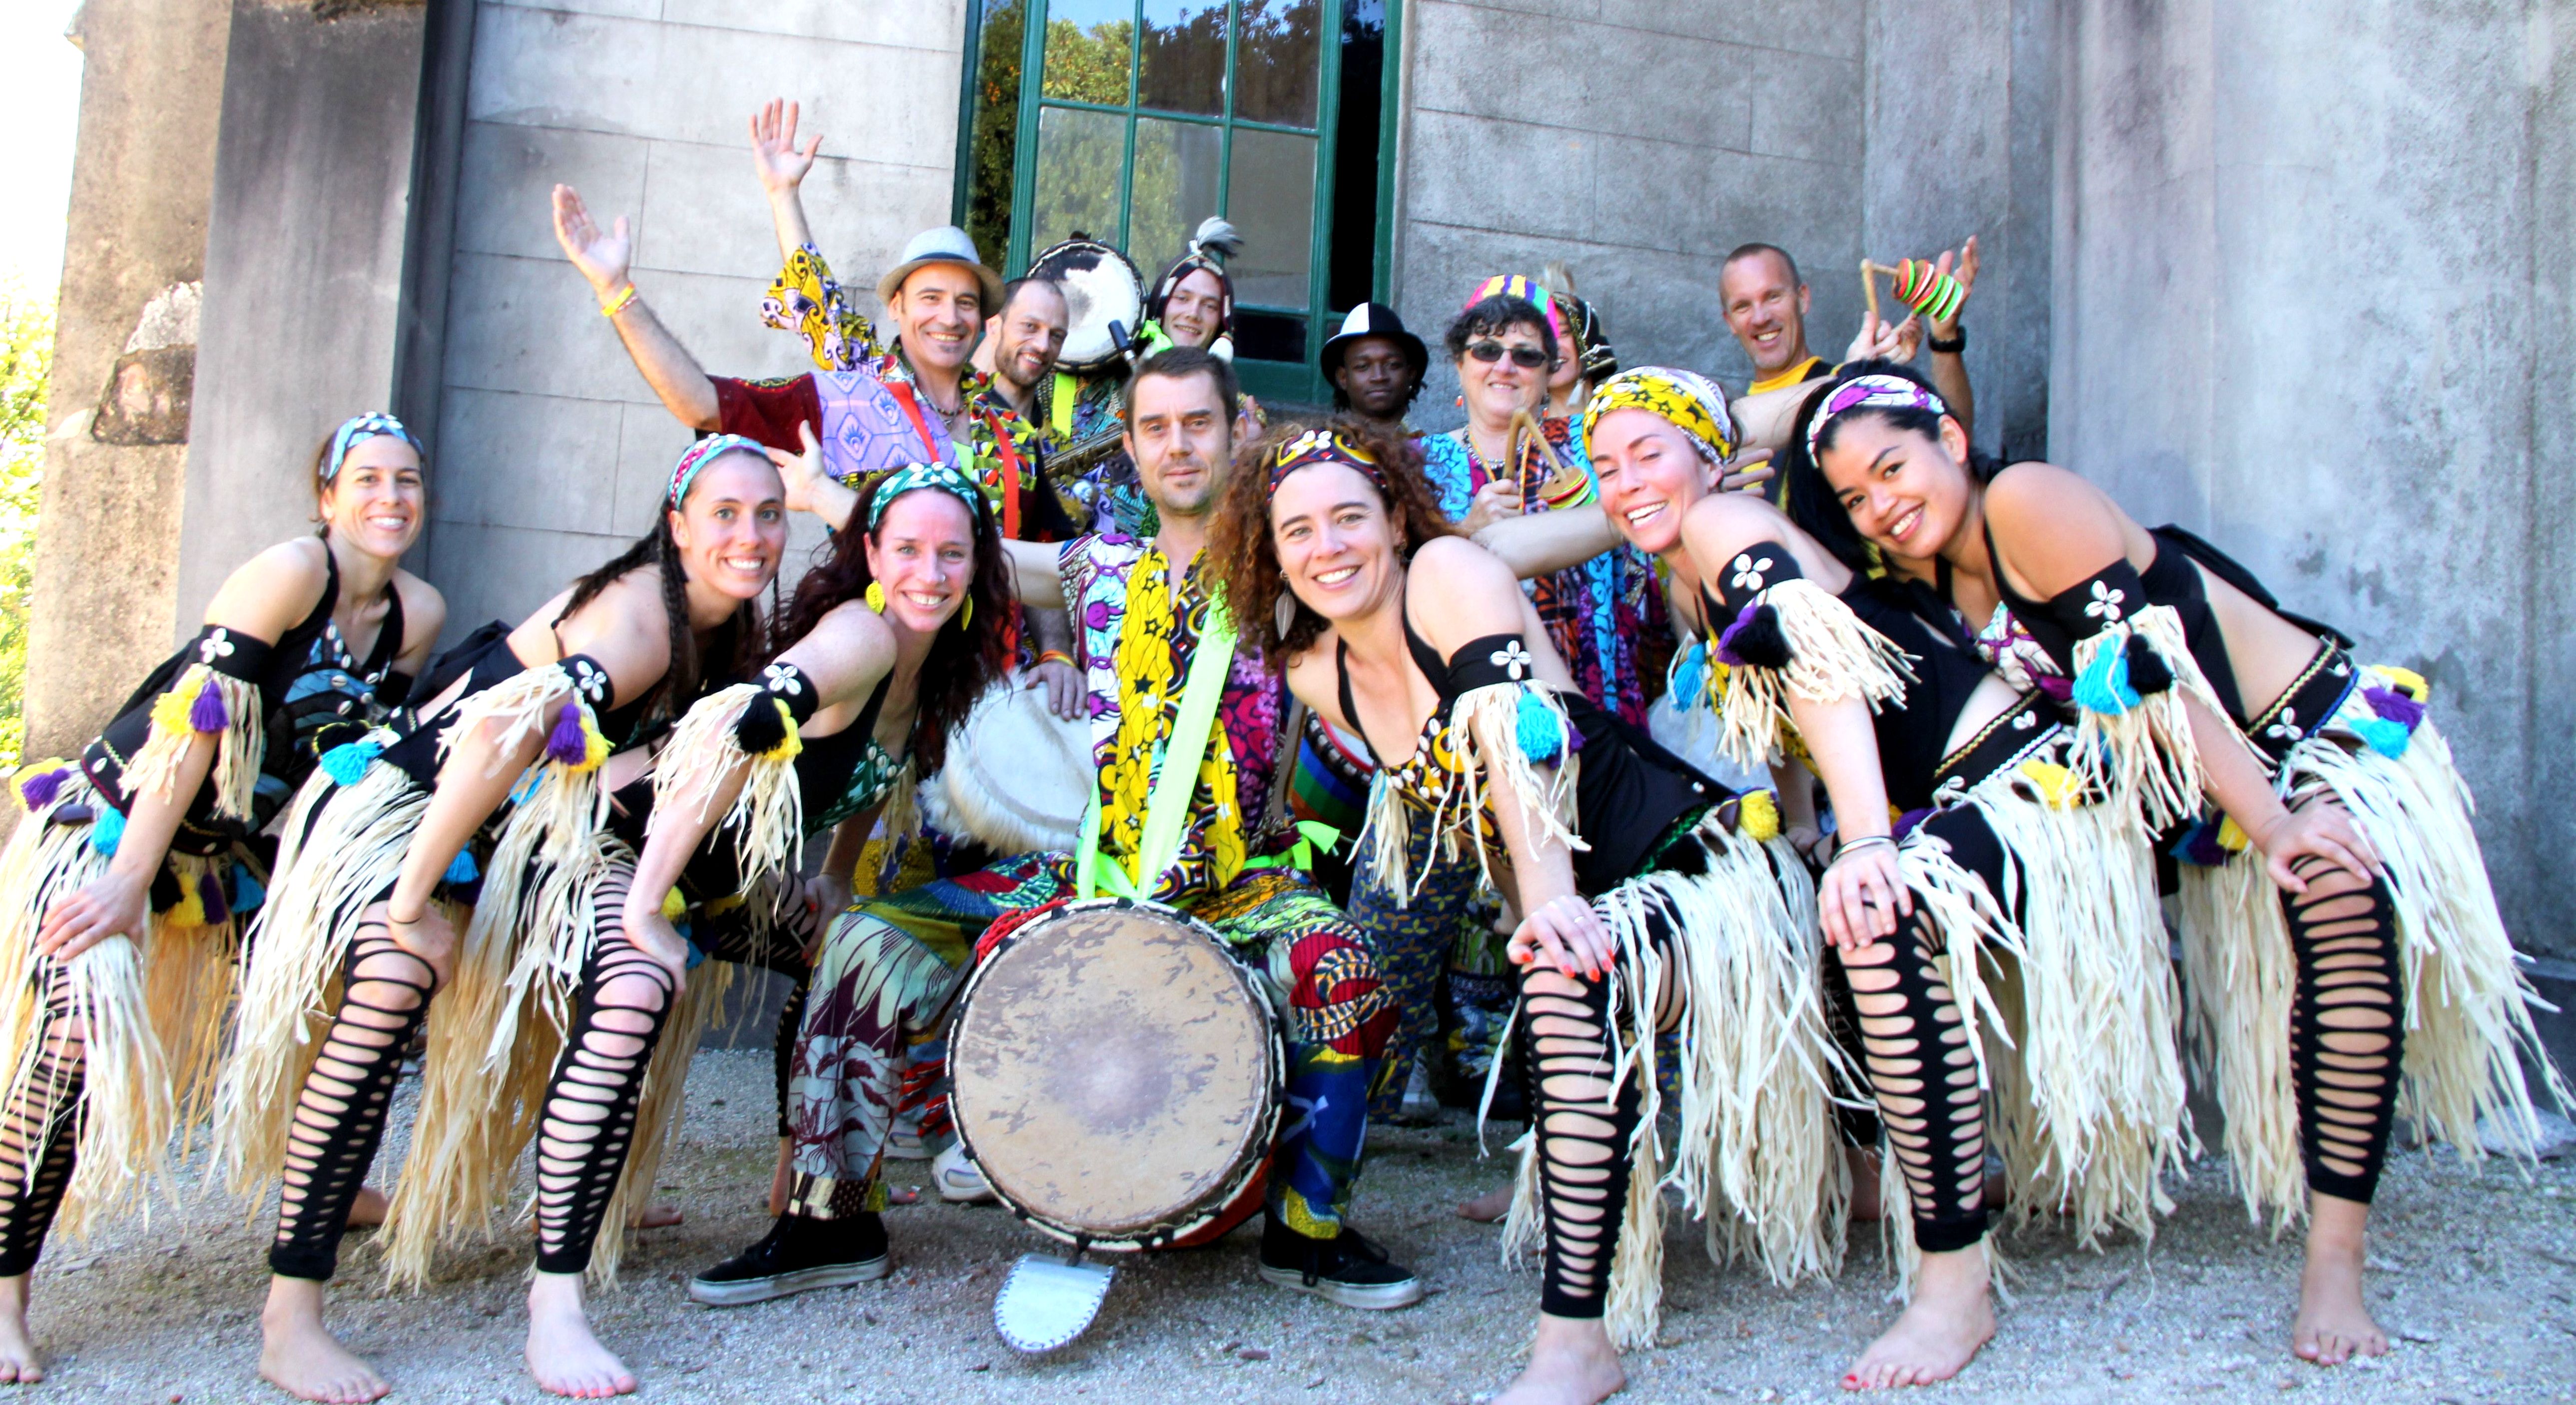 Drummers and dancers posing for a photo at Beechworth festival